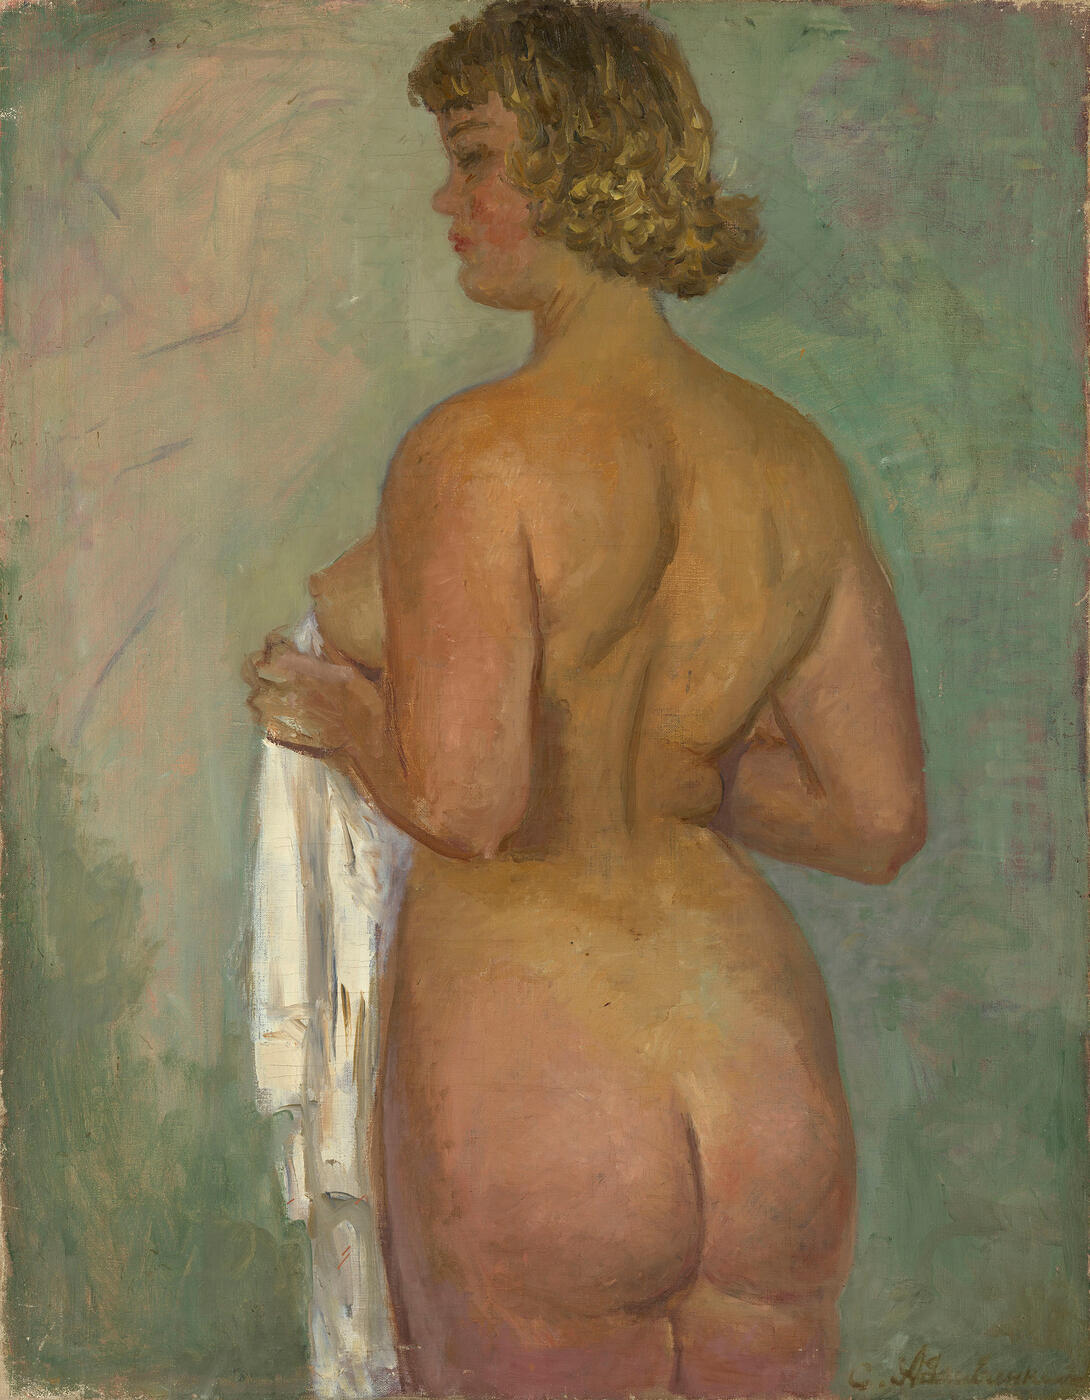 Nude with a Towel